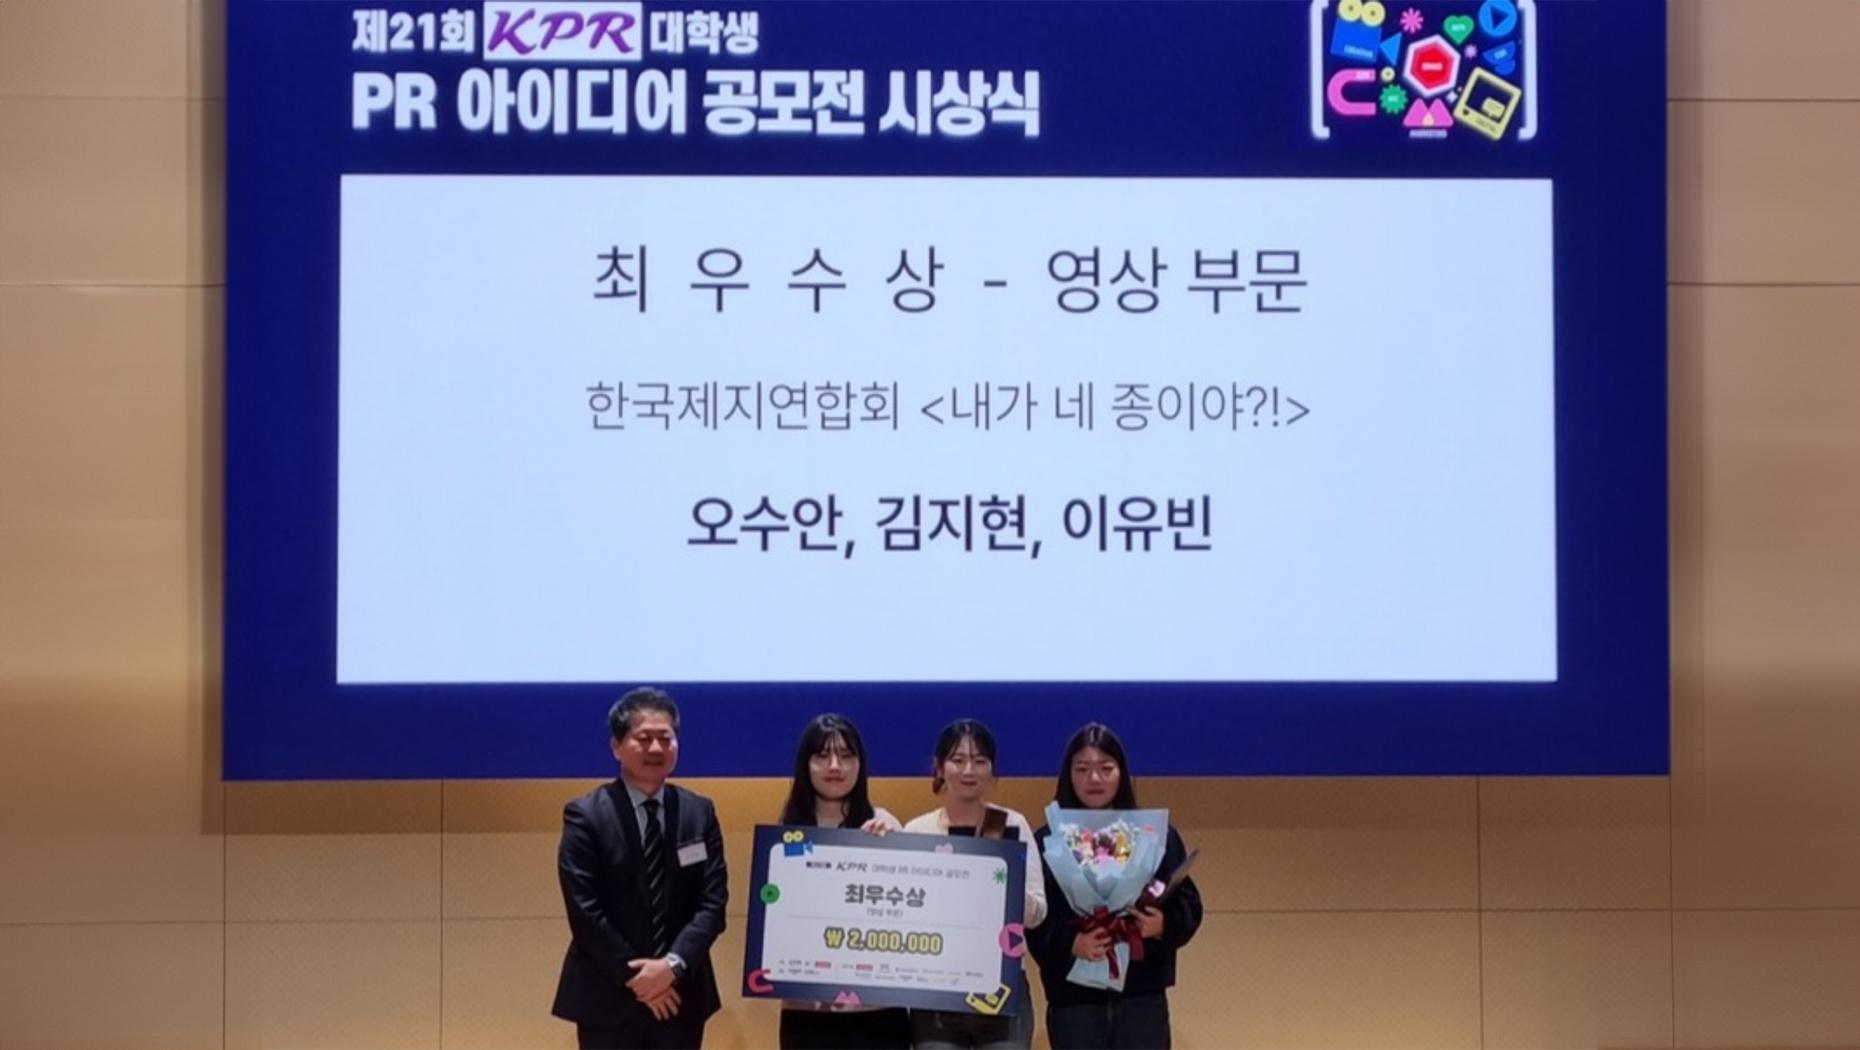 Students in the Department of Media Communication at Incheon National University Wins the Best Prize 대표이미지